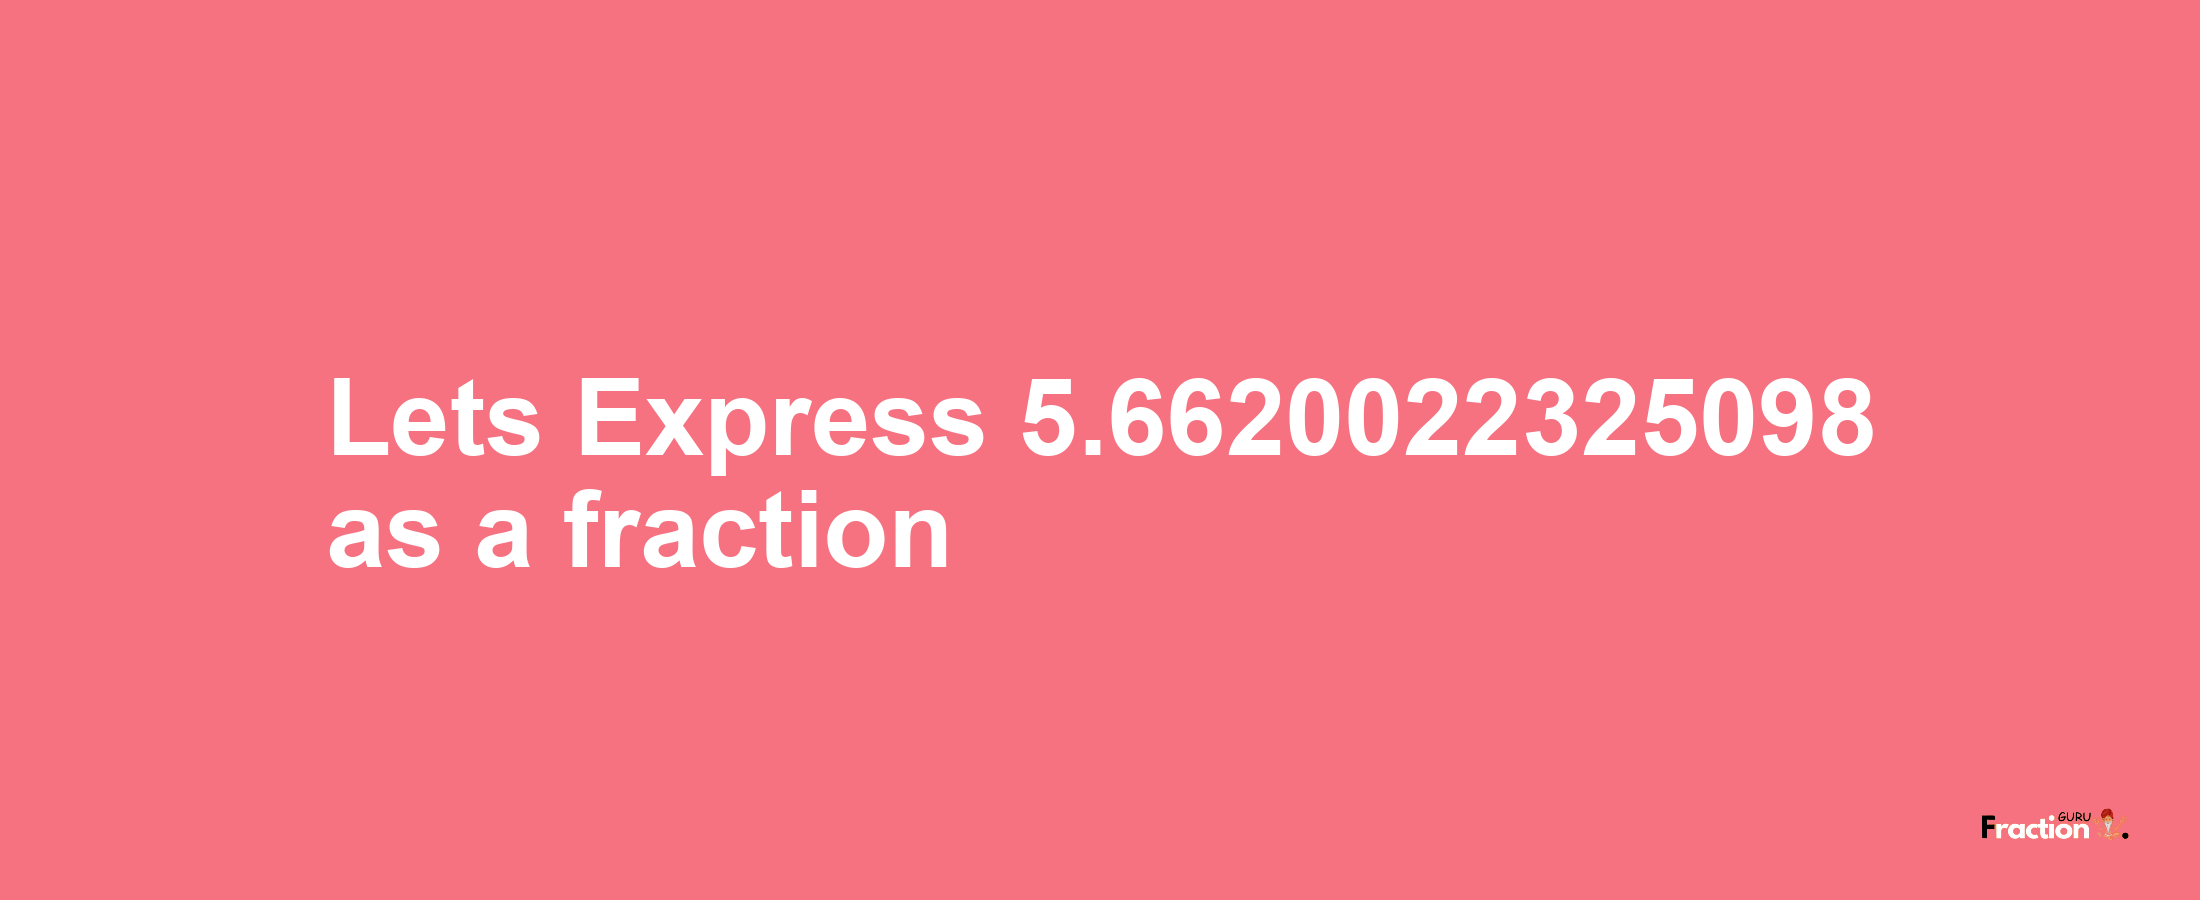 Lets Express 5.6620022325098 as afraction